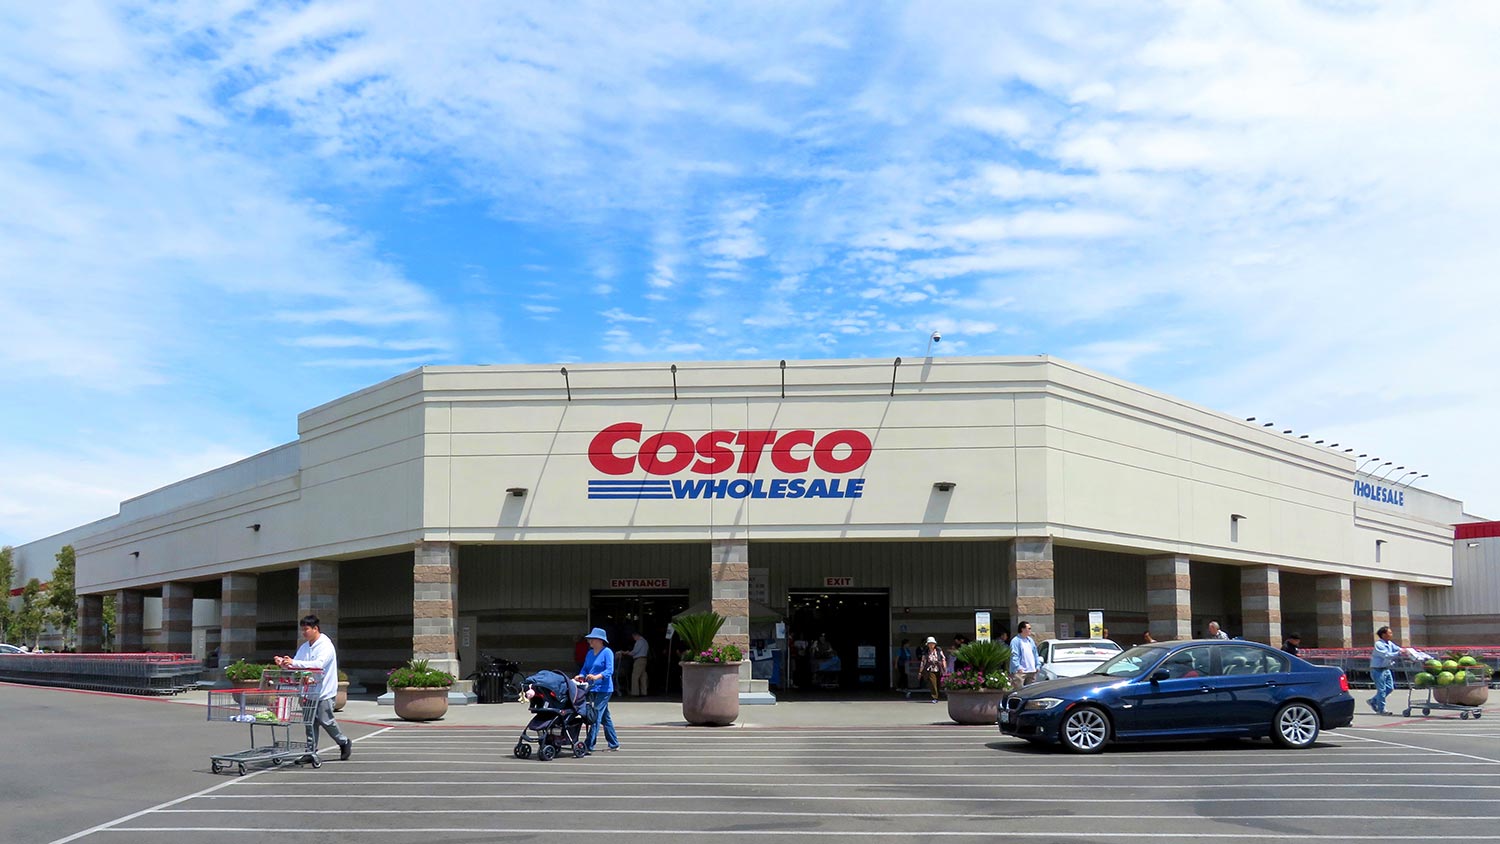 Costco wholesale corporation is the 2nd largest retailer in the U.S.